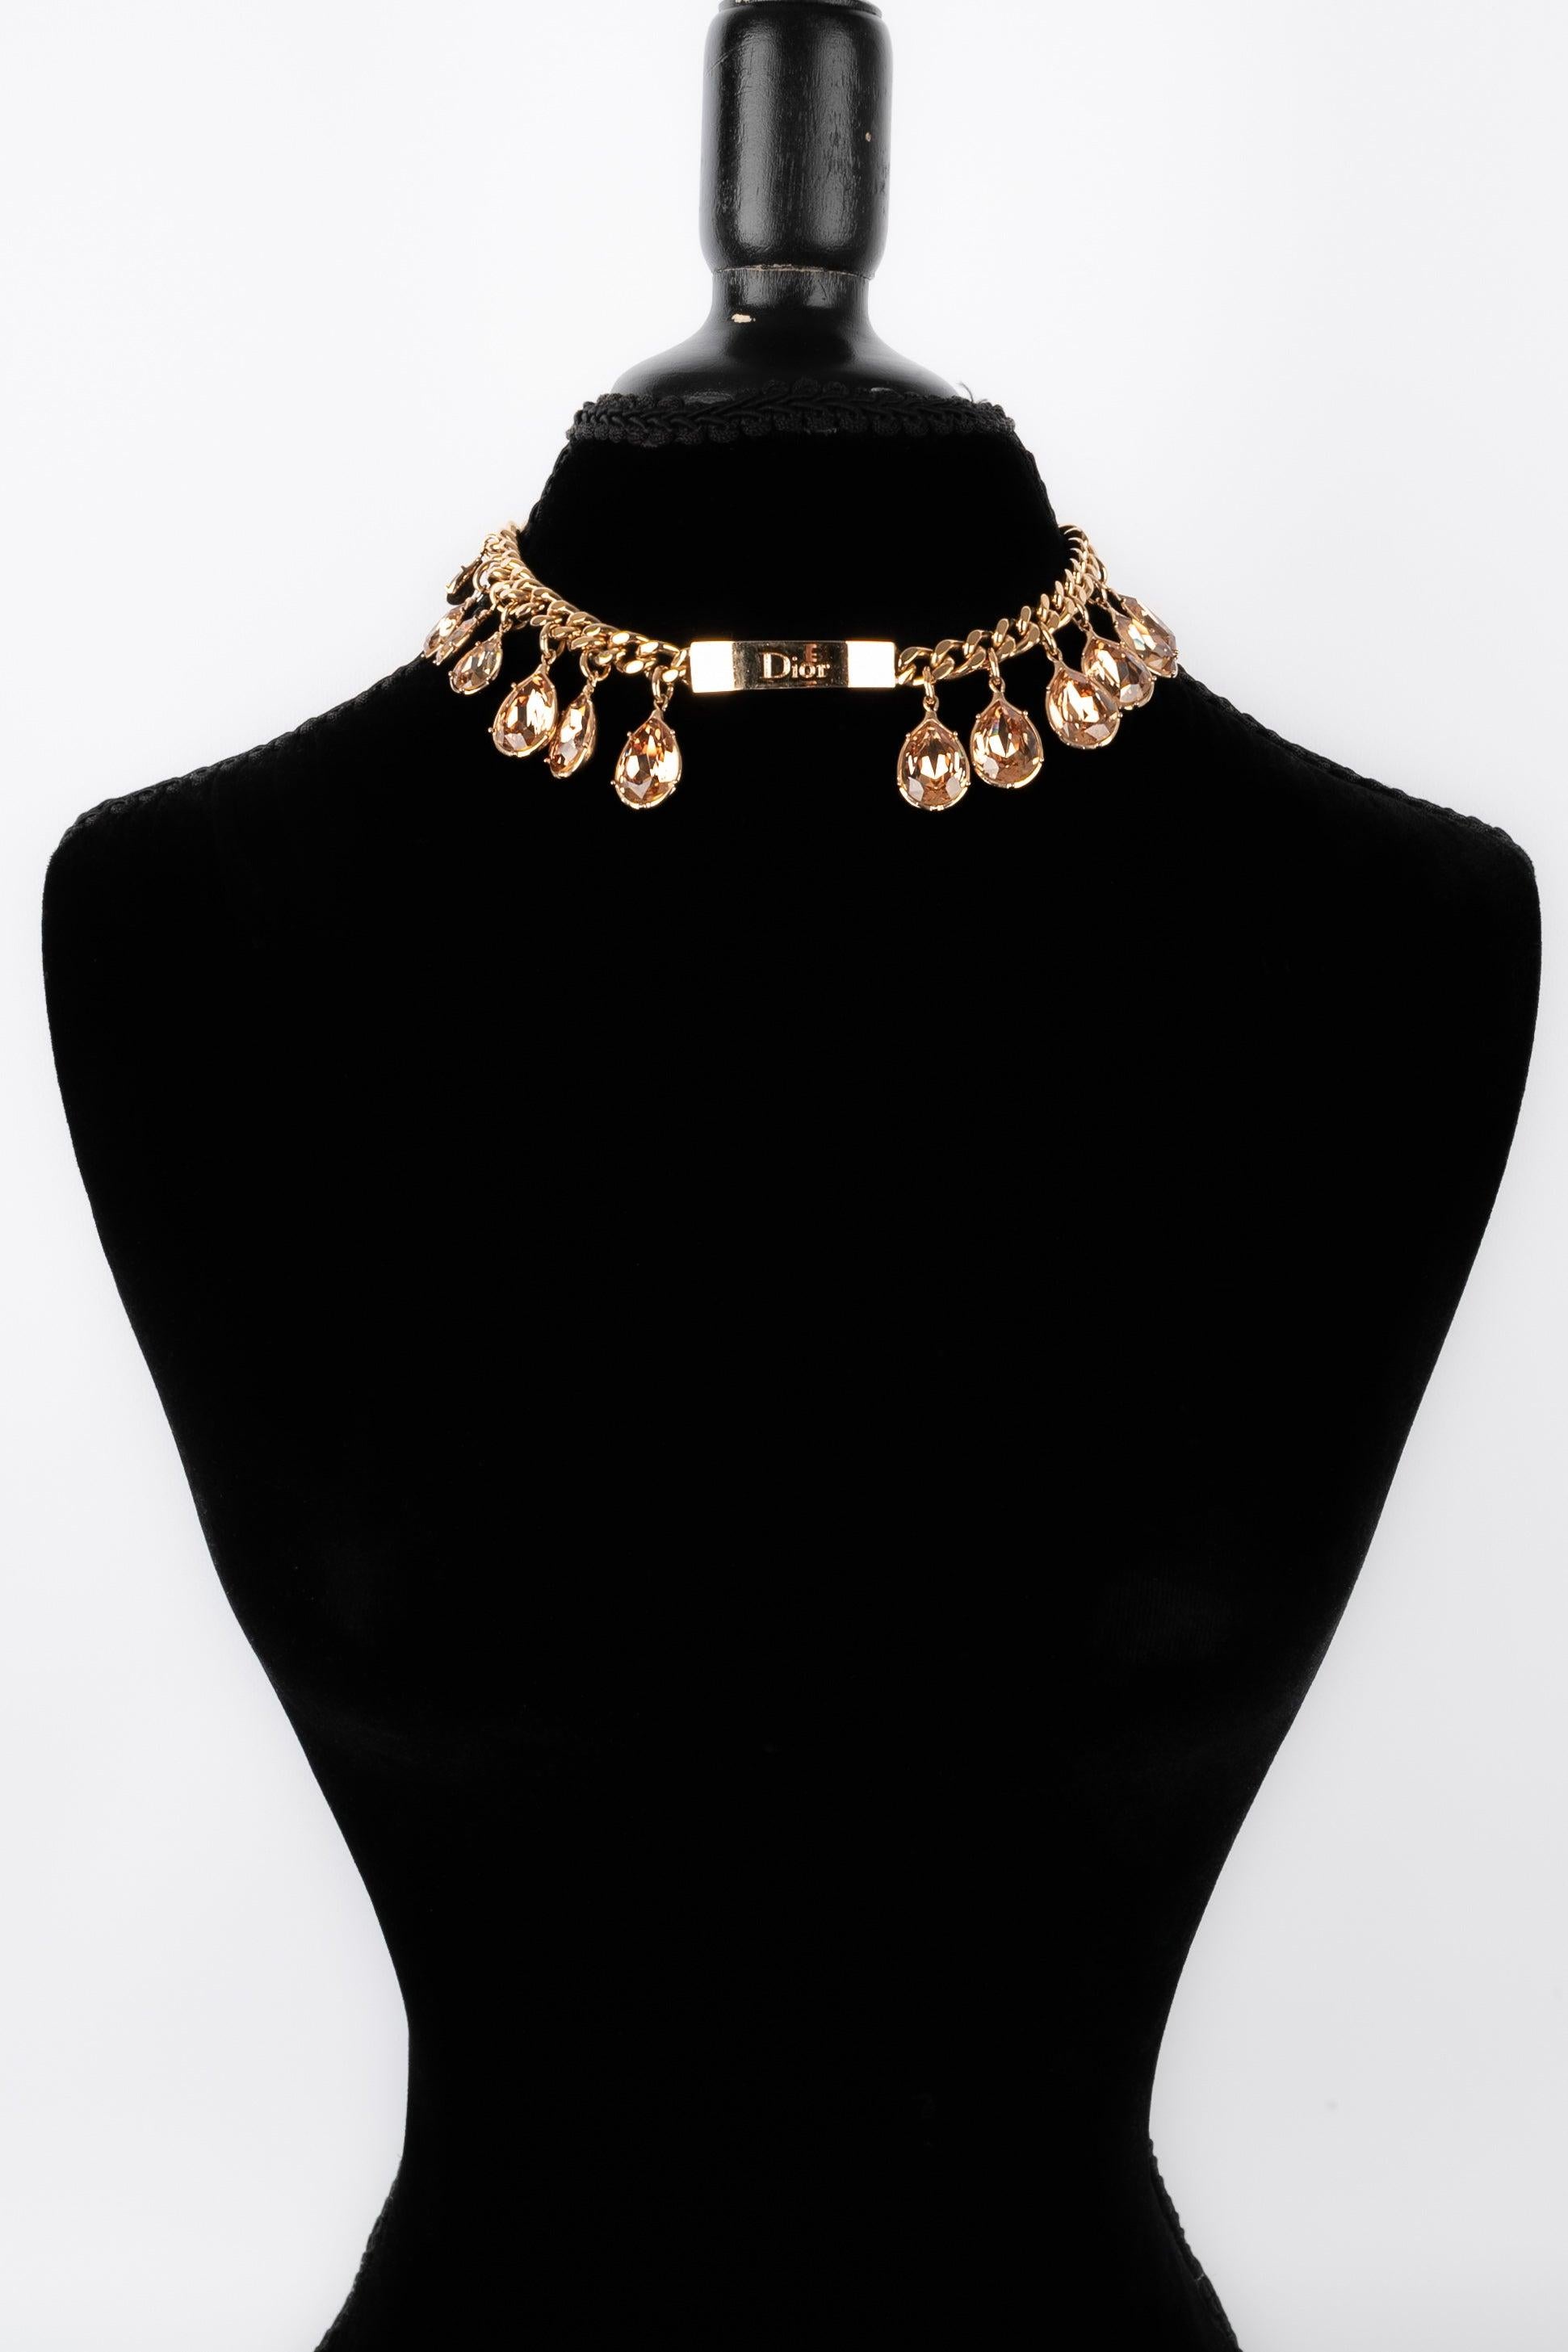 Women's Christian Dior Necklace with Rhinestoned Charms, 2004 For Sale